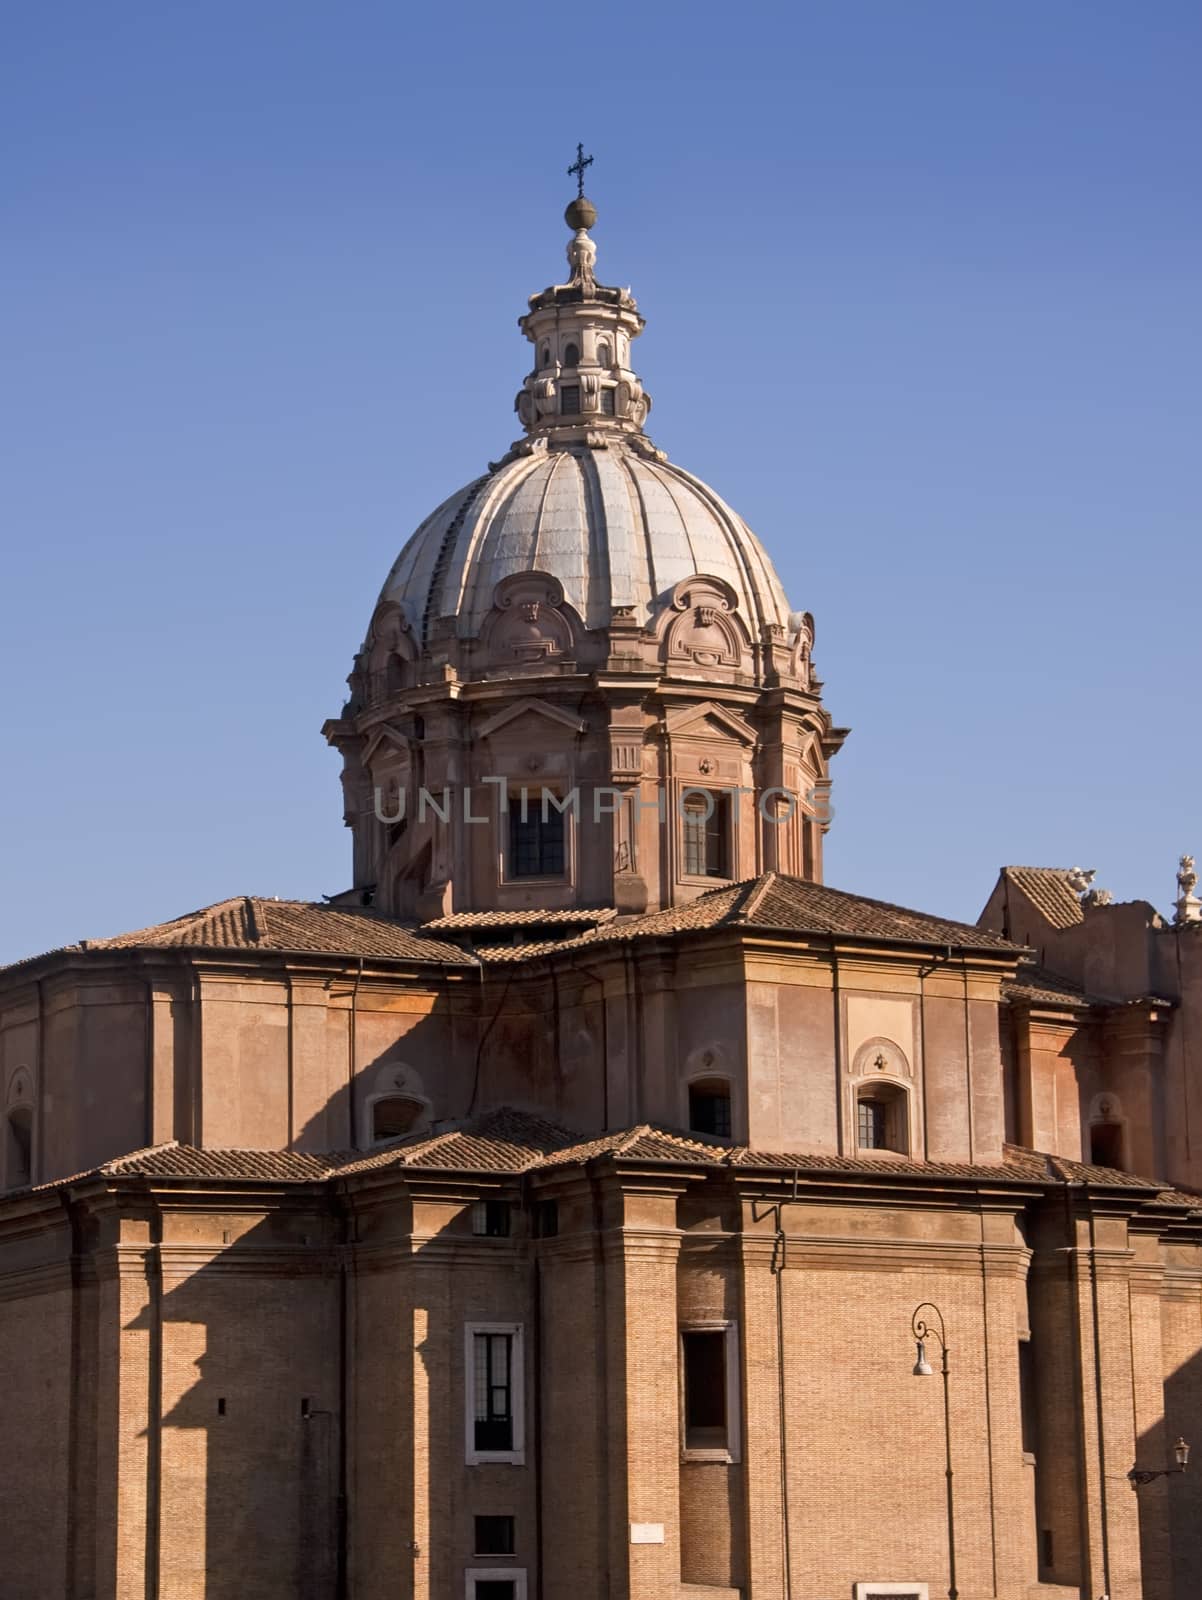 Dome of the church in Forum Romanum in Rome, Italy